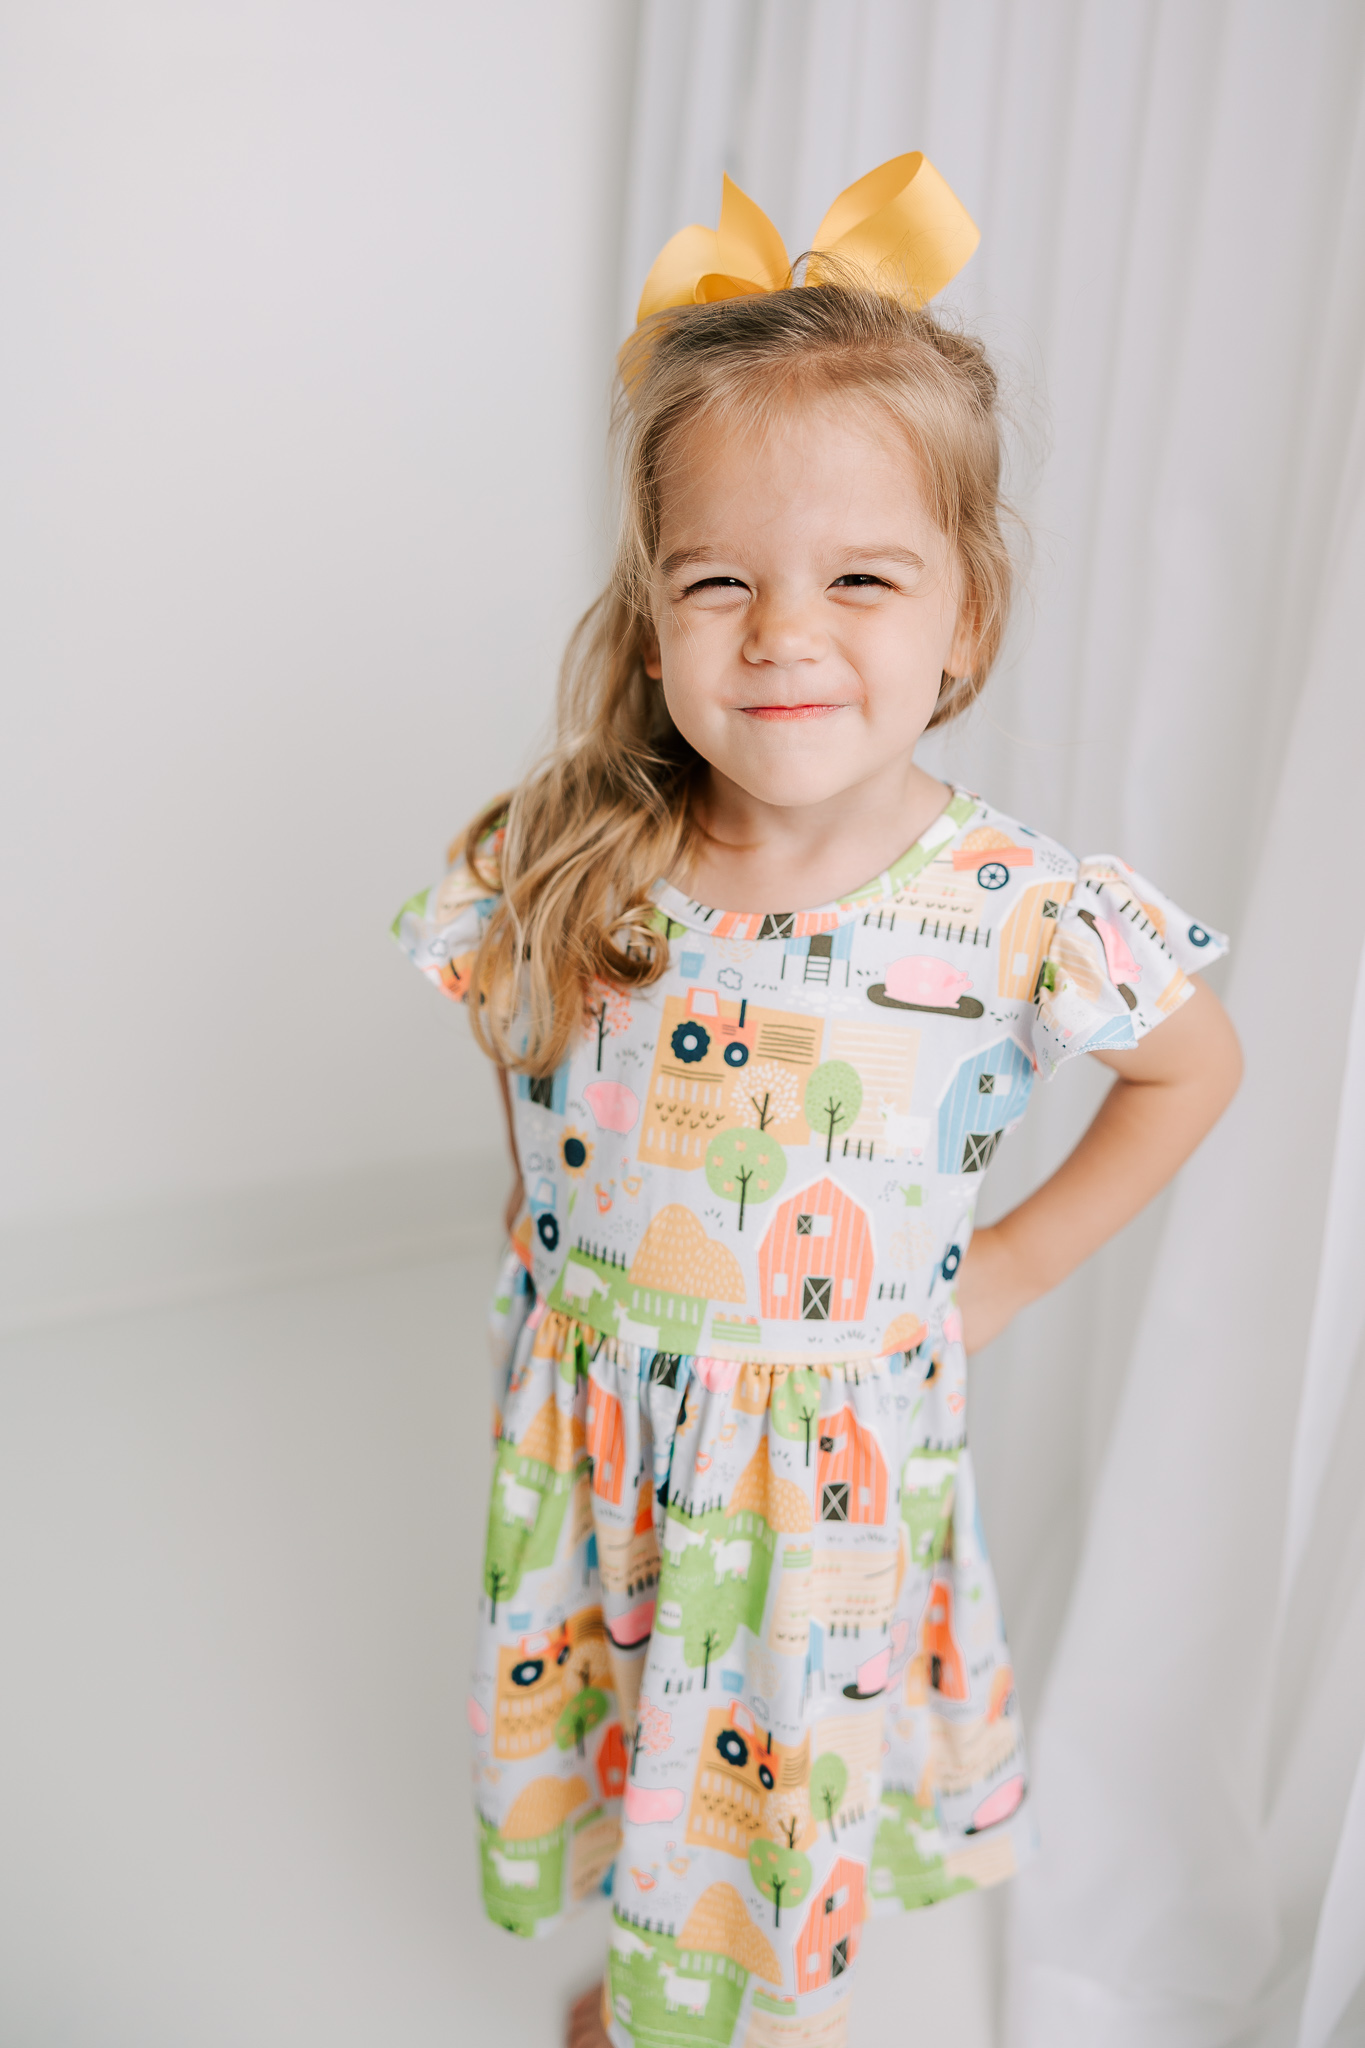 Little girl smiling during her milestone session in the studio showing off her new farm dress.